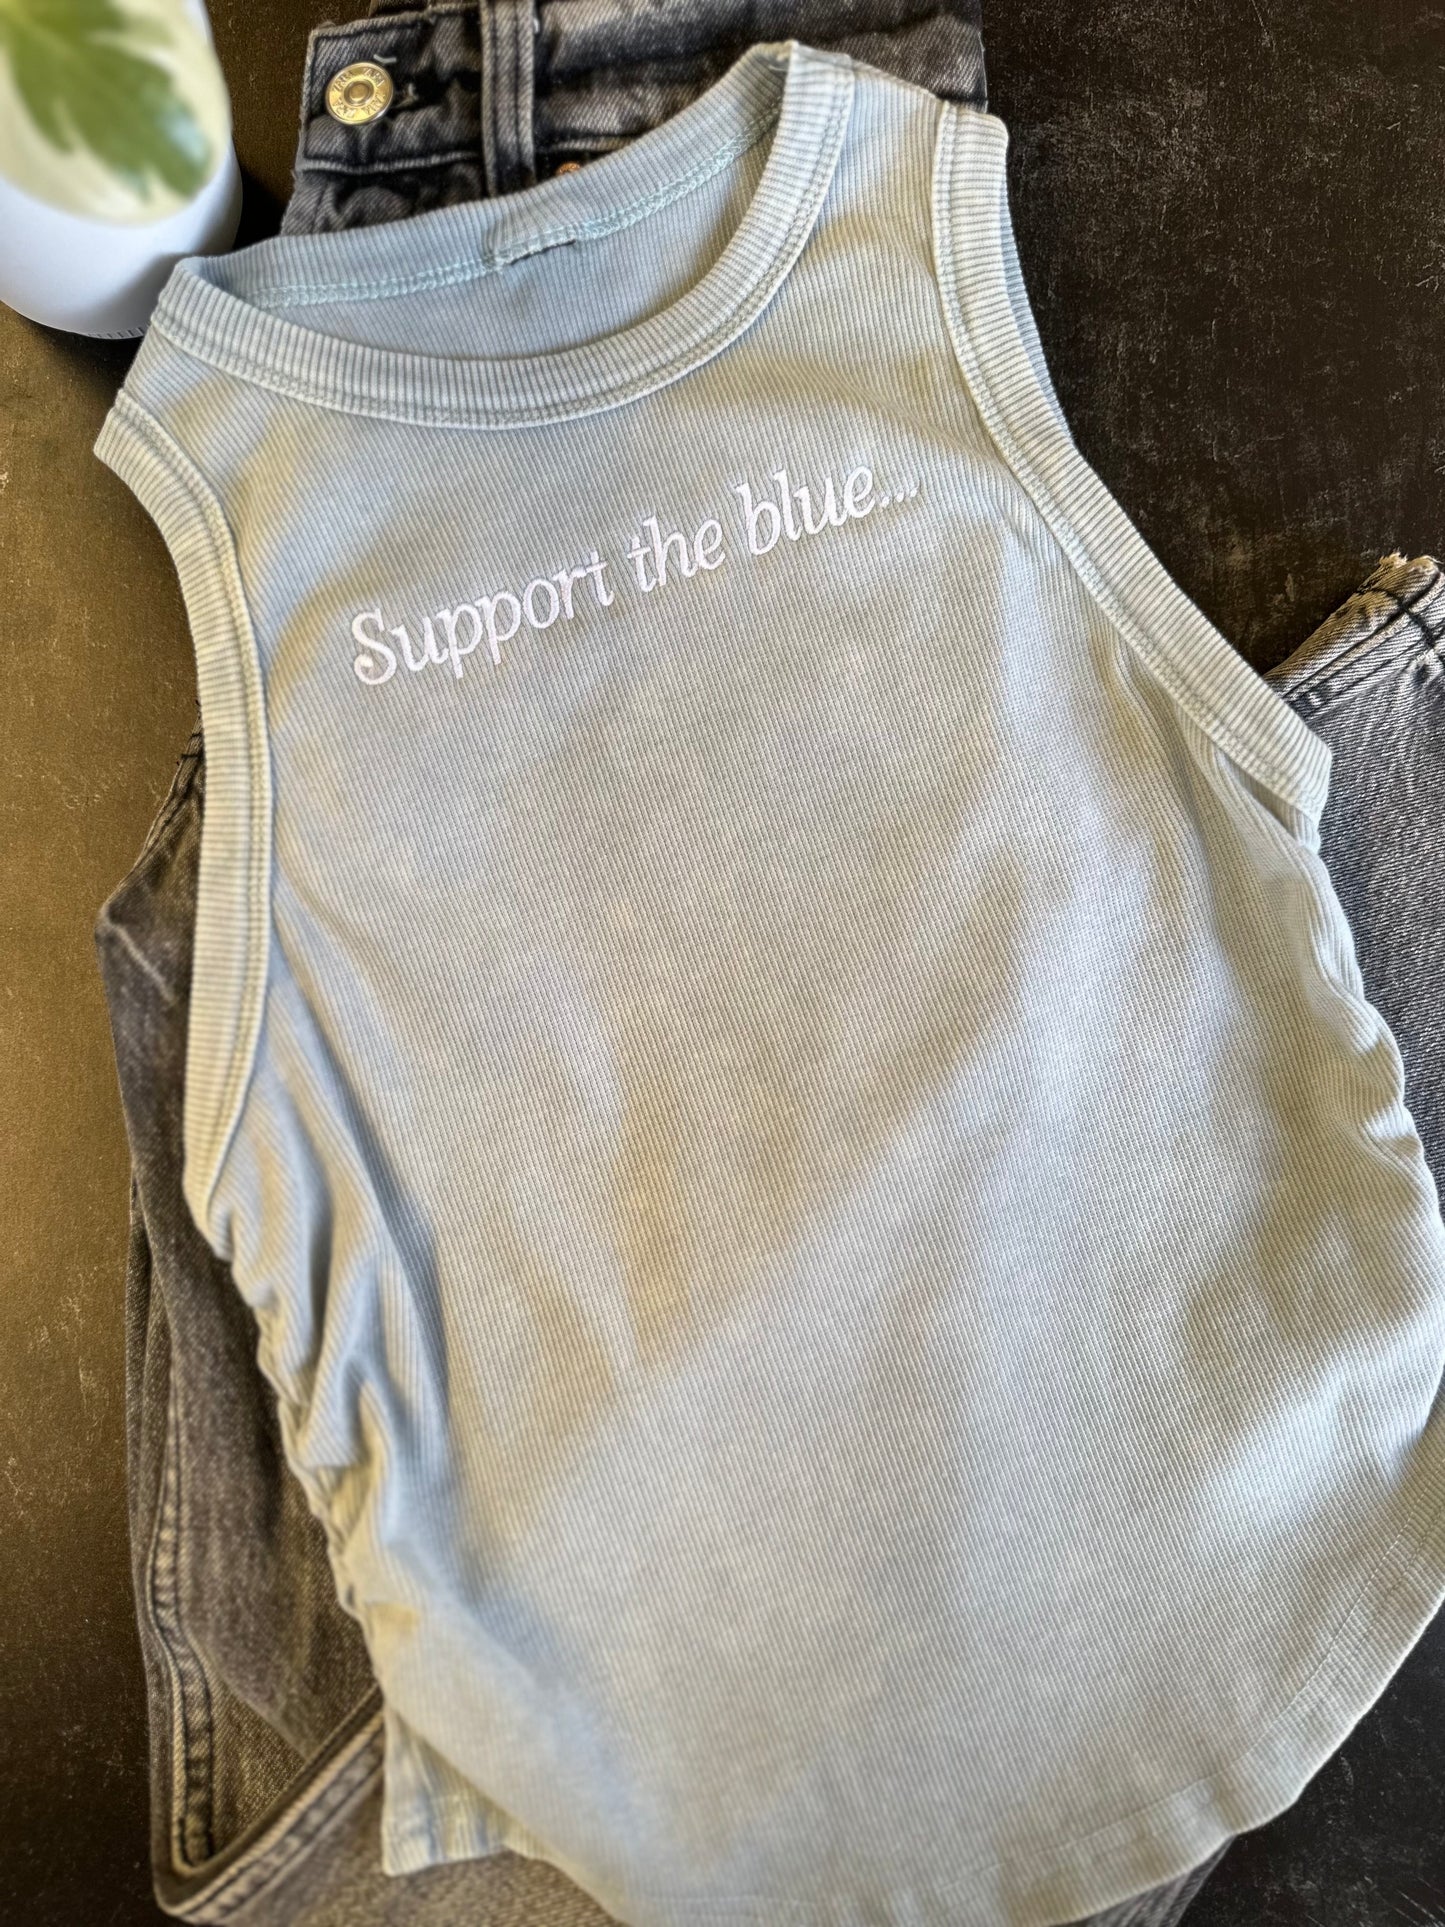 Embroidered Support the Blue Tank Top